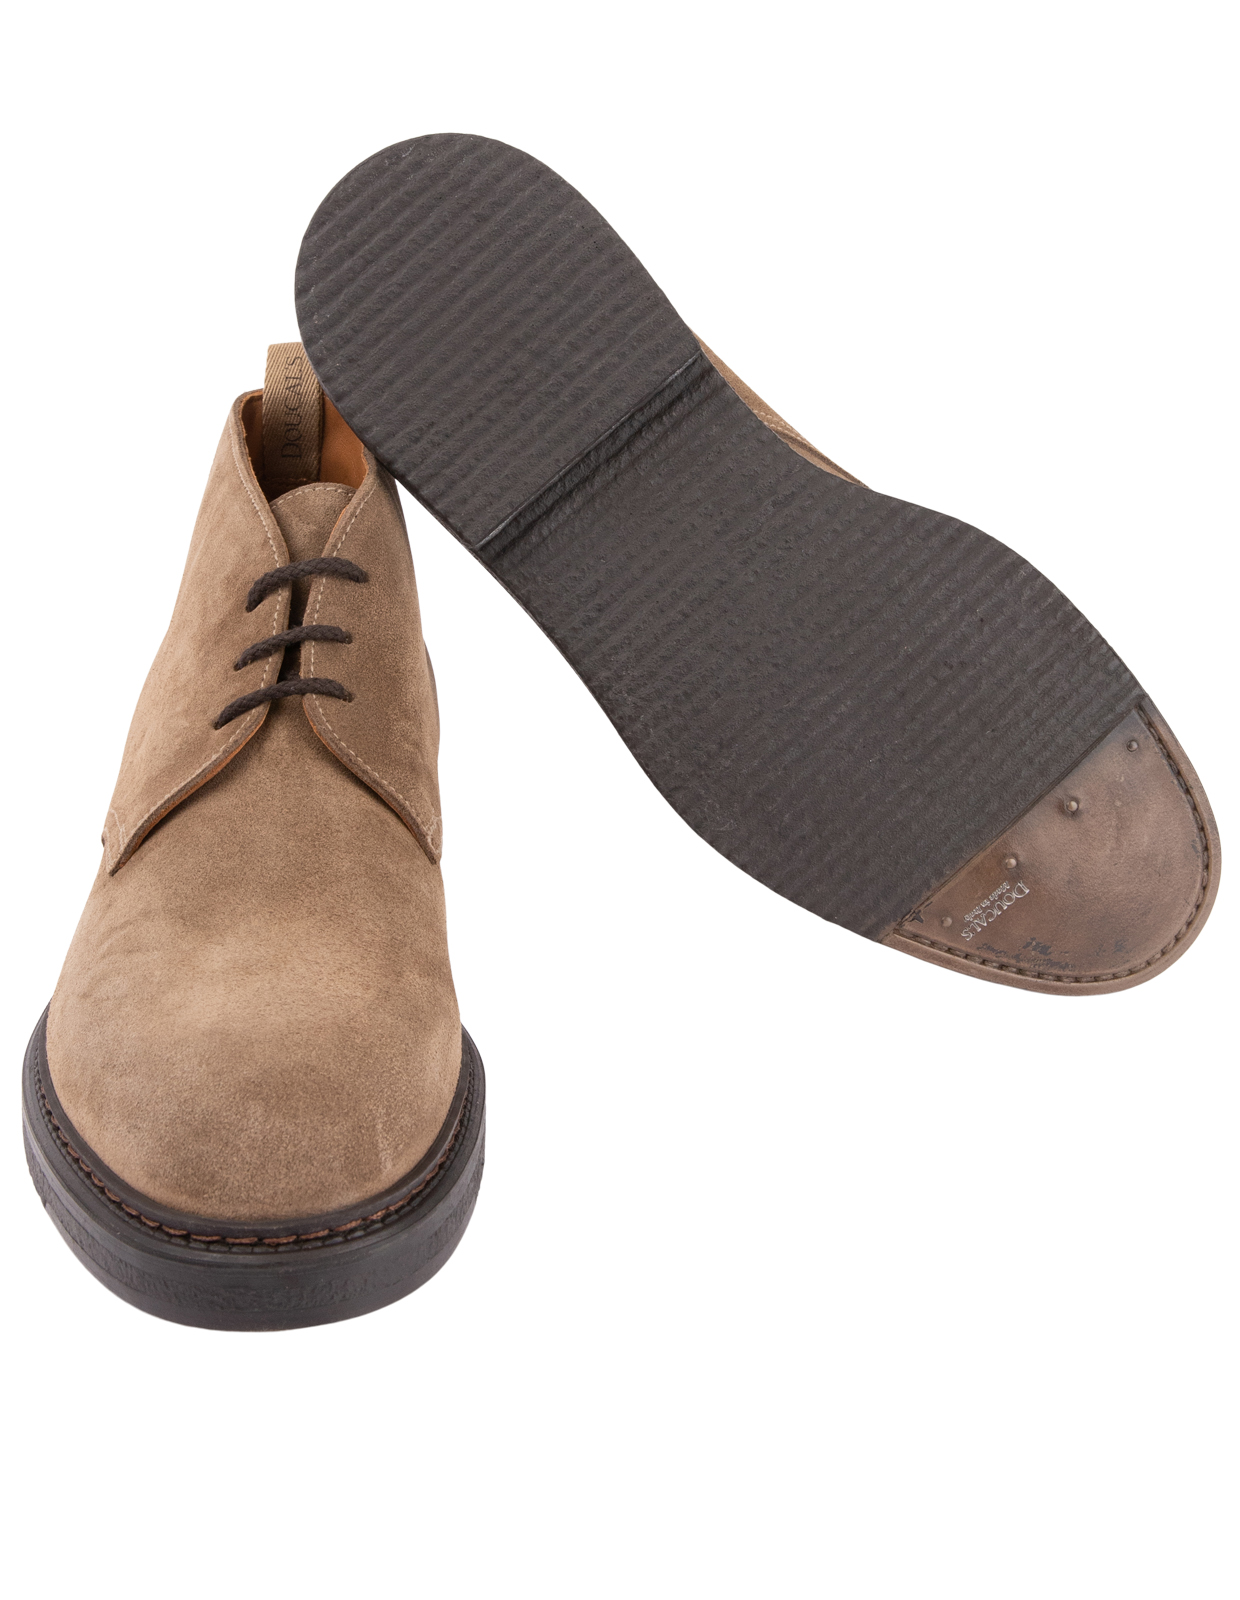 Chukka Boots Suede Tabacco Stl 42.5